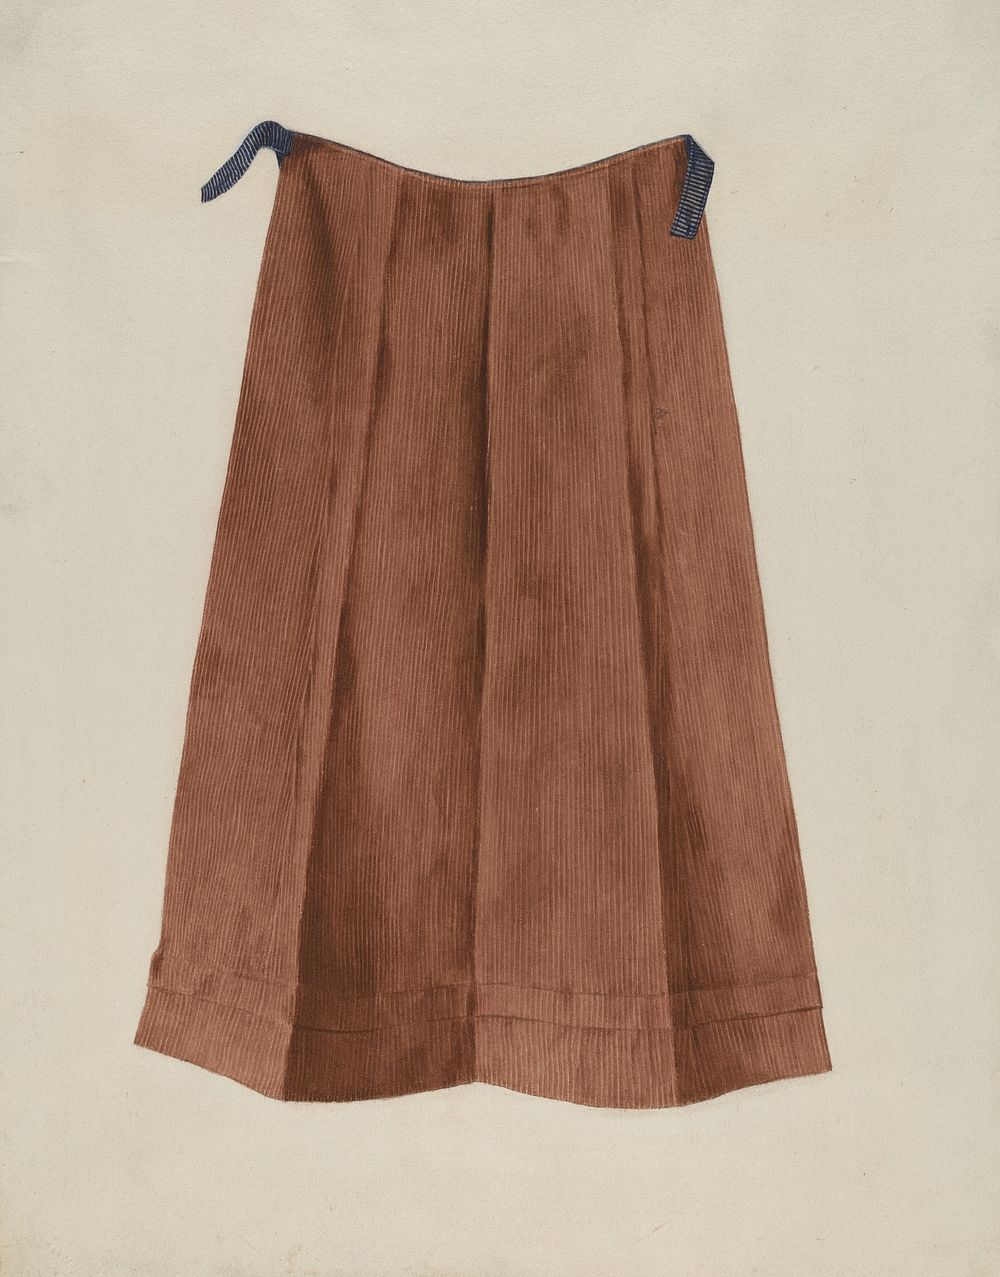 Shaker Woman's Apron (c. 1936) by Betty Fuerst.  